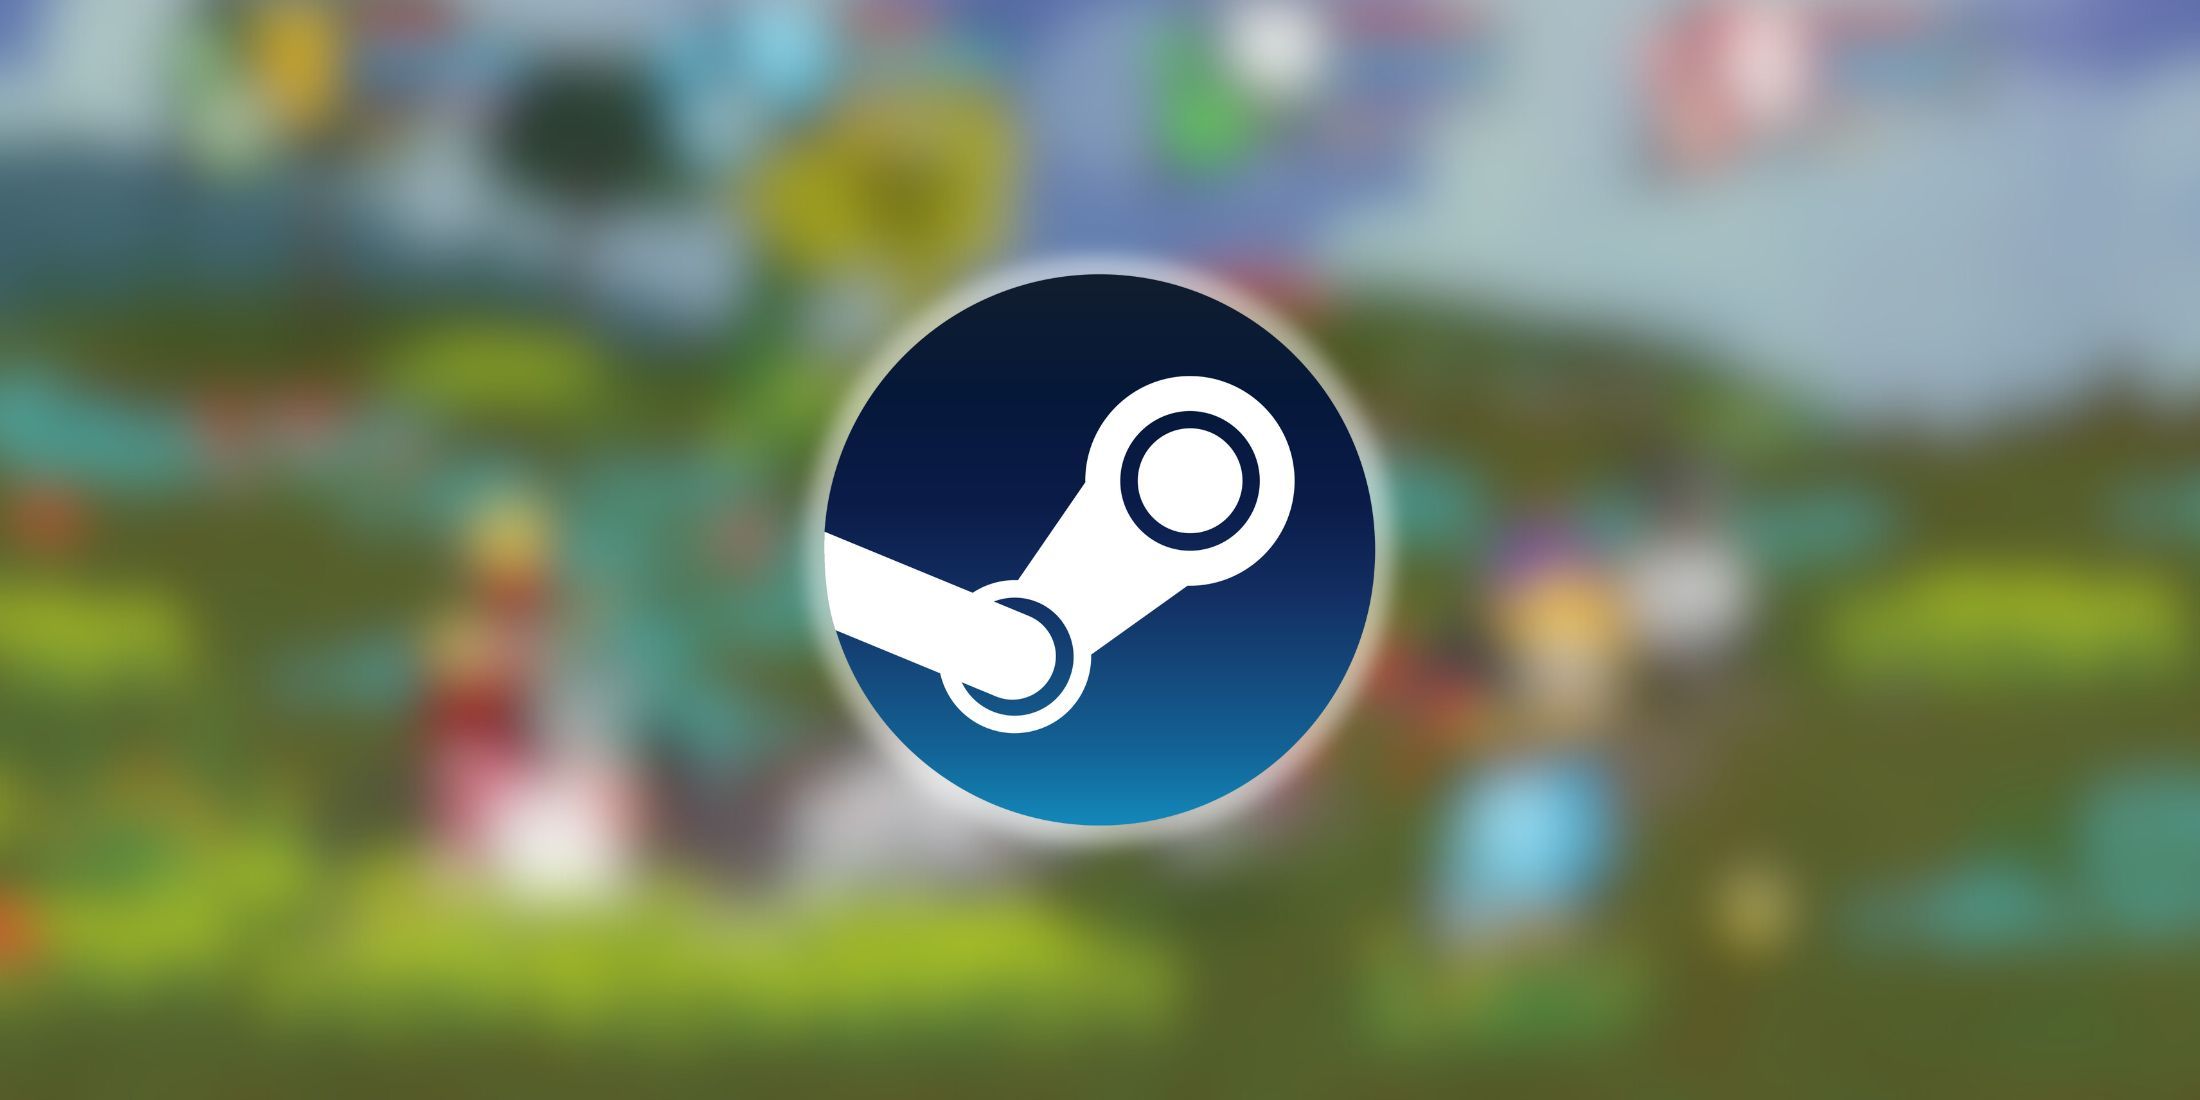 An indie game is rising in popularity again on Steam years after its release.